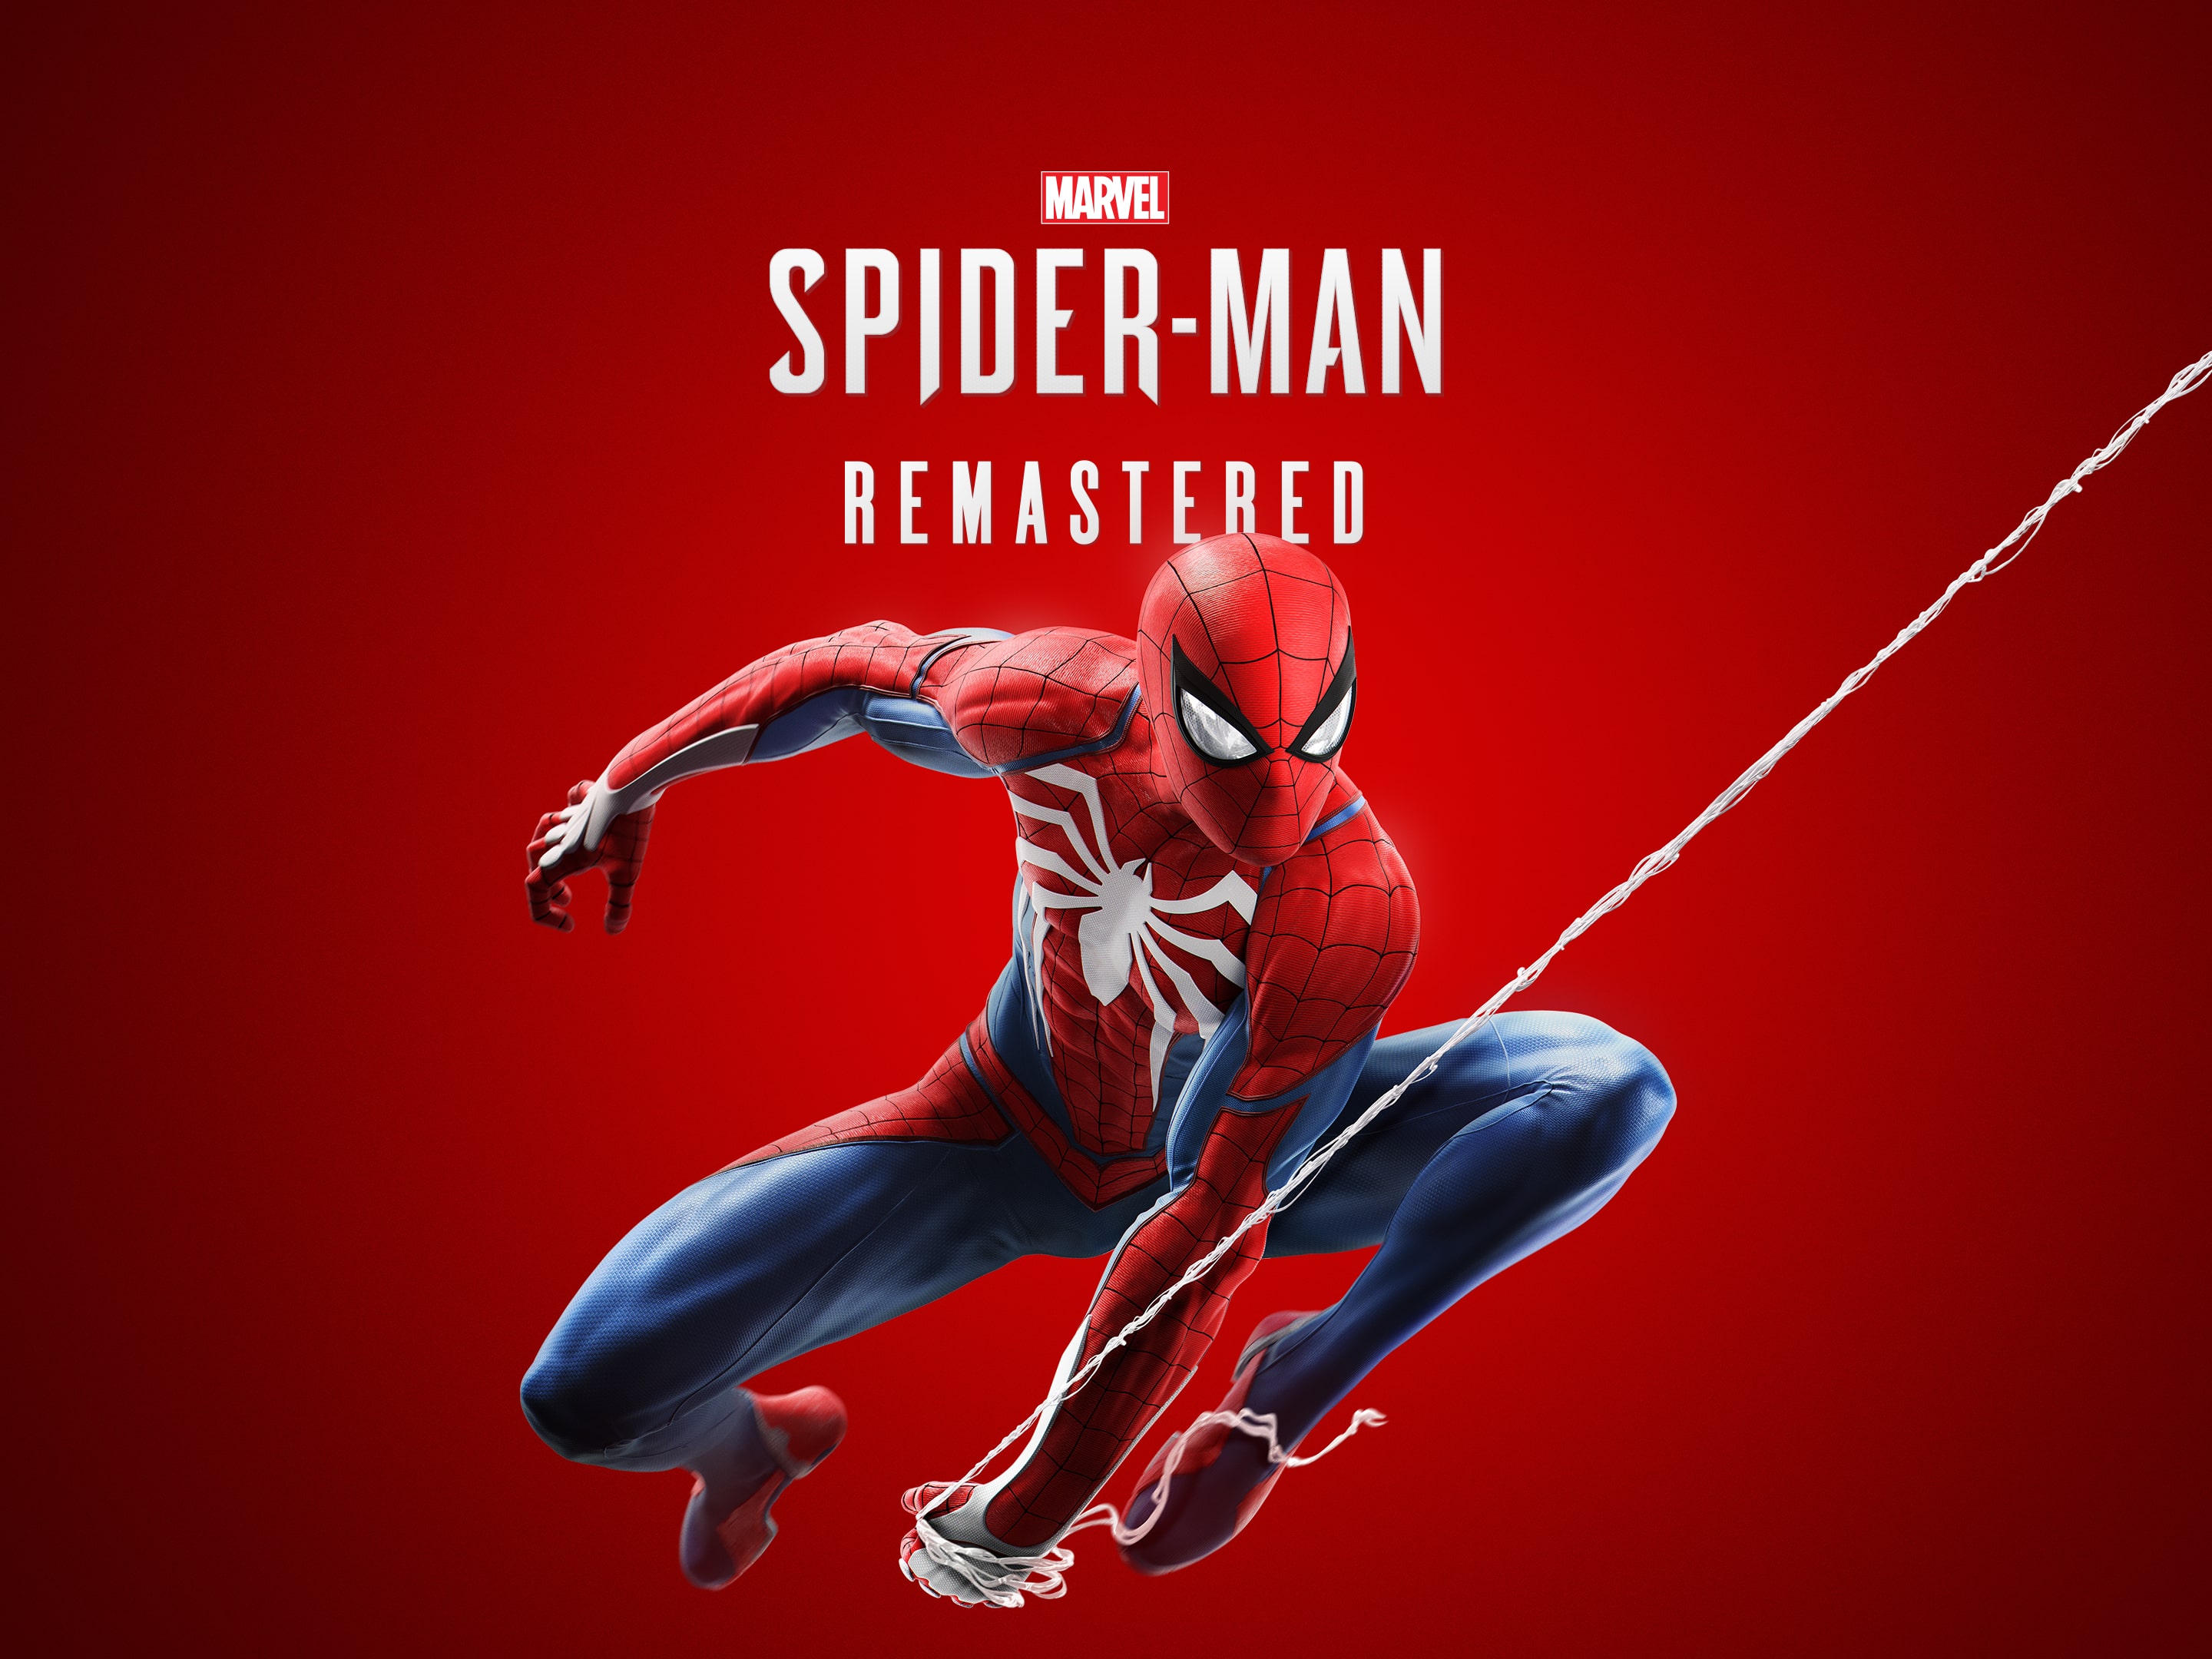 Buy Marvel's Spider-Man 2 PS5 Playstation Store